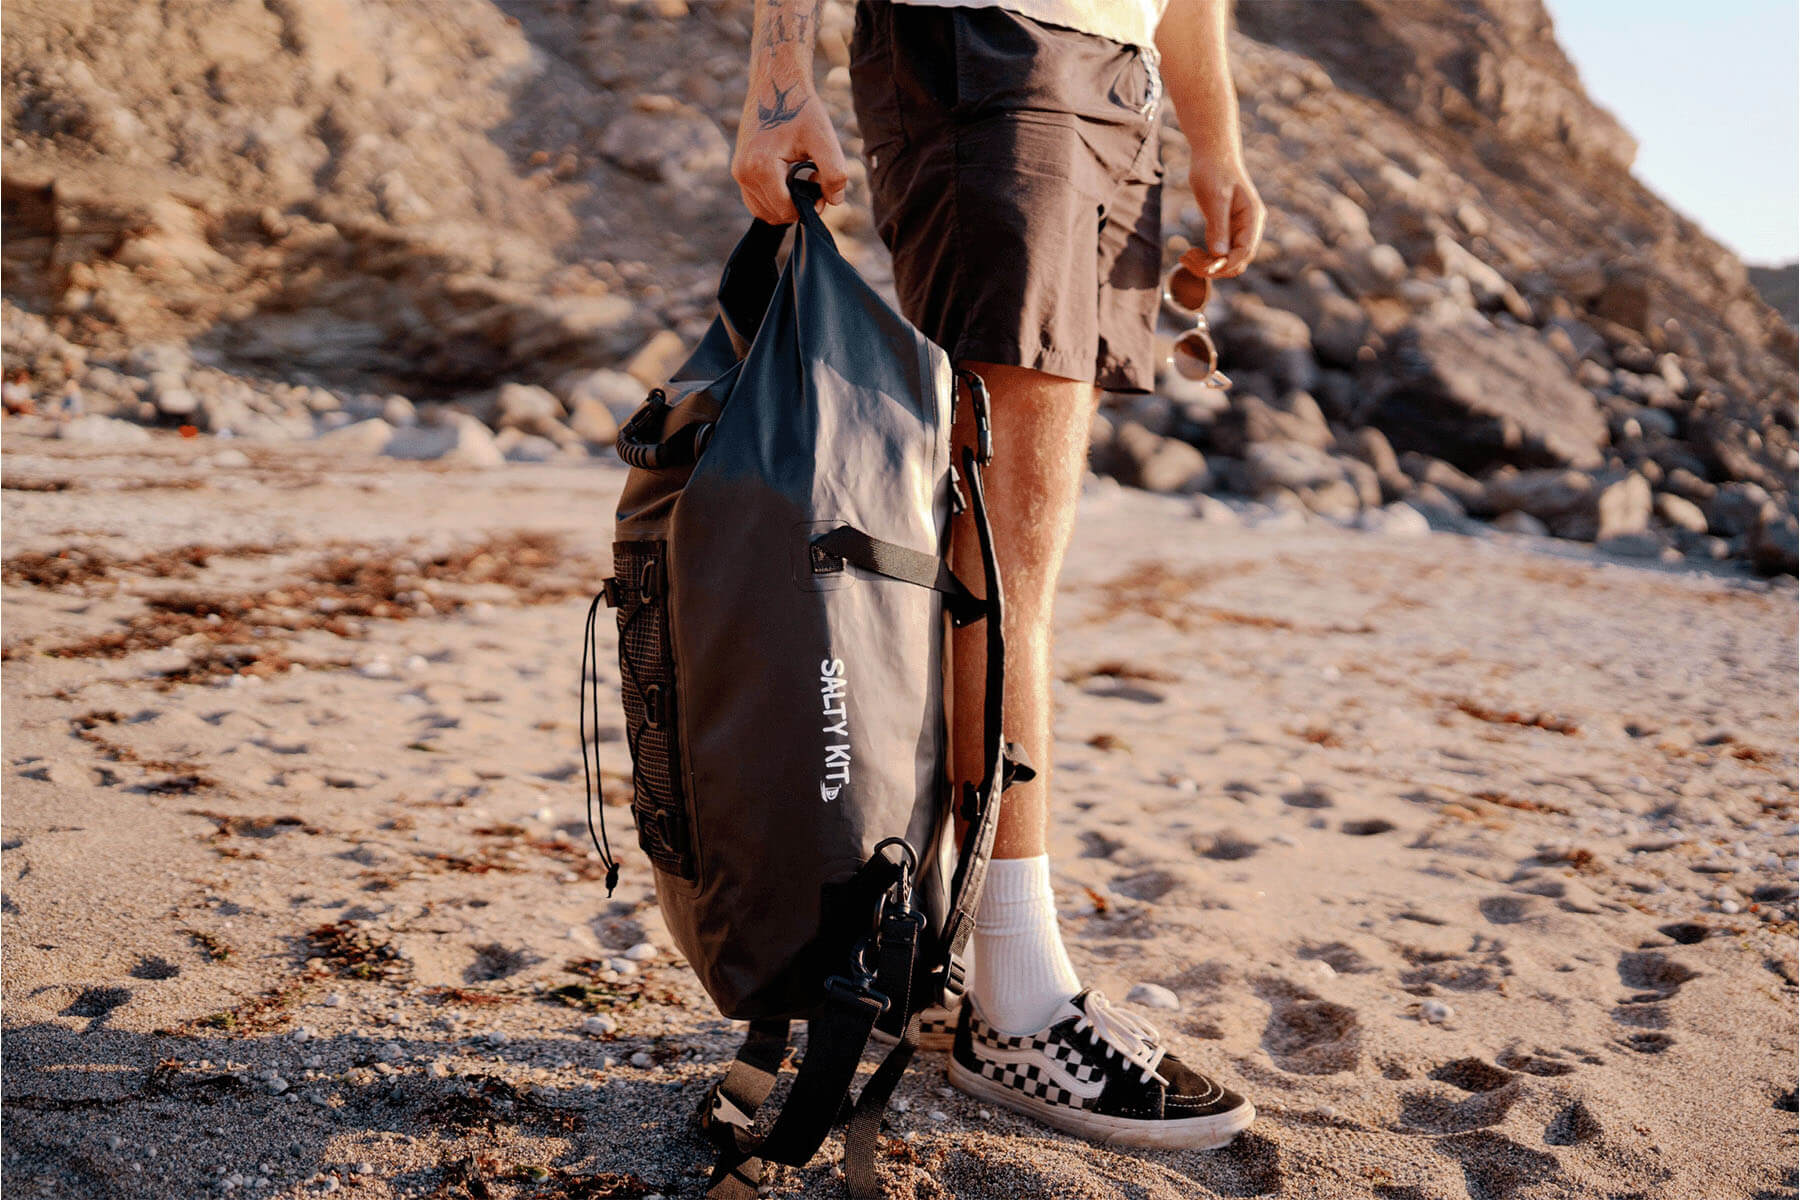 the salty kit 30 litre backpack is the ultimate bag build for adventure and comes in olive and black colours. this shows a man holding the waterproof bag on the beach